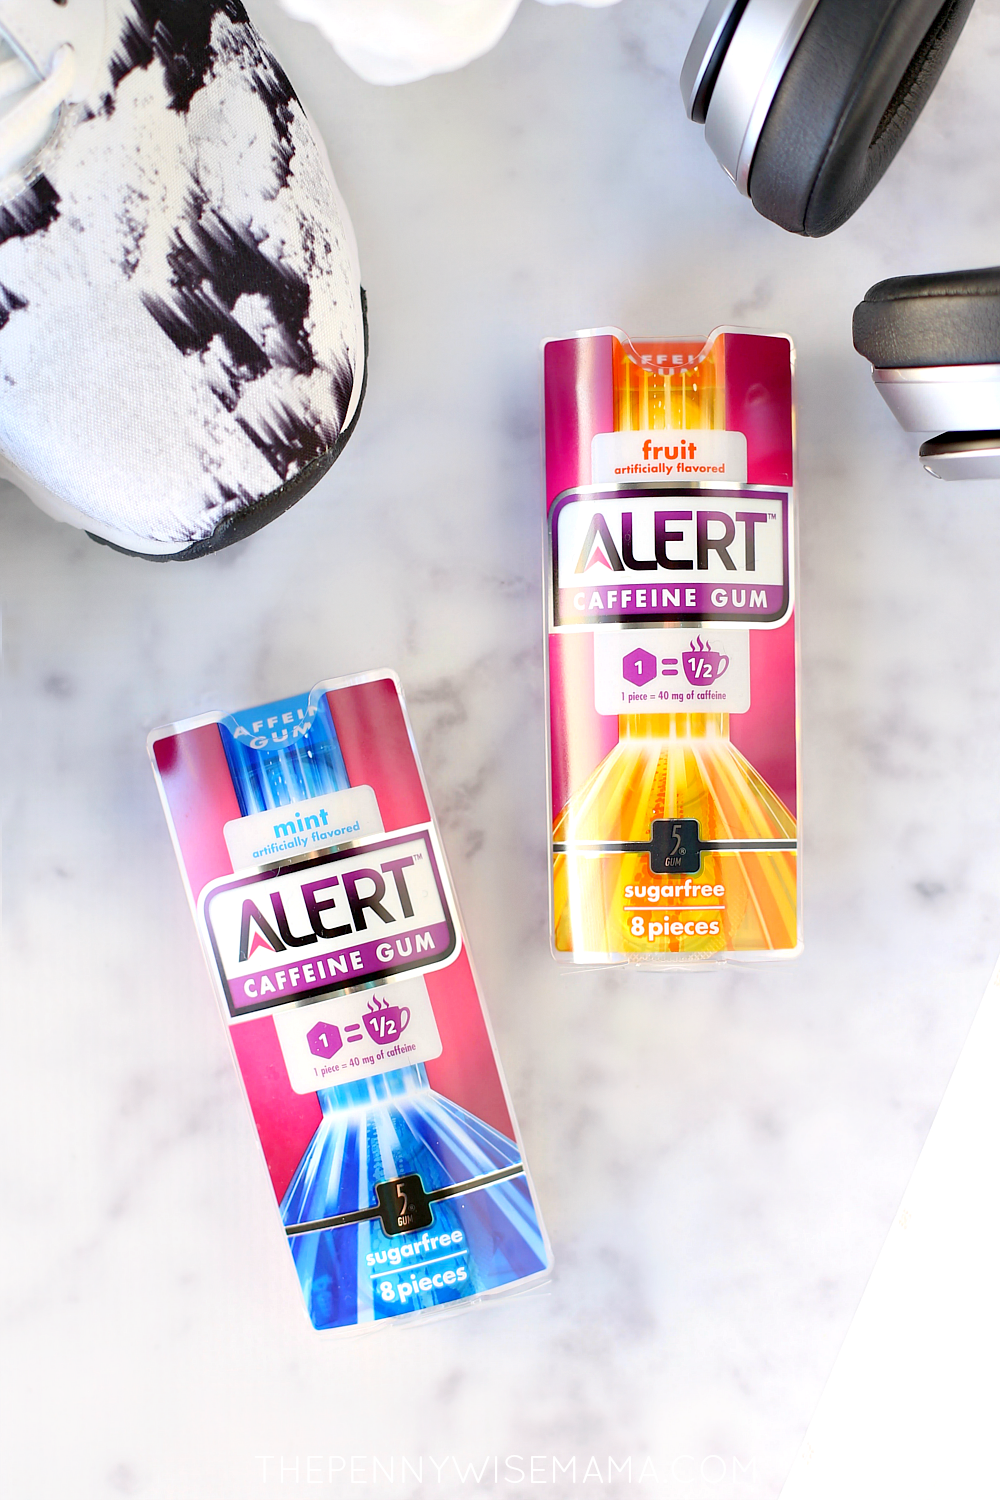 Tips to Help You Stick to Your Fitness Goals this Year + See How Alert Caffeine Gum Can Help!